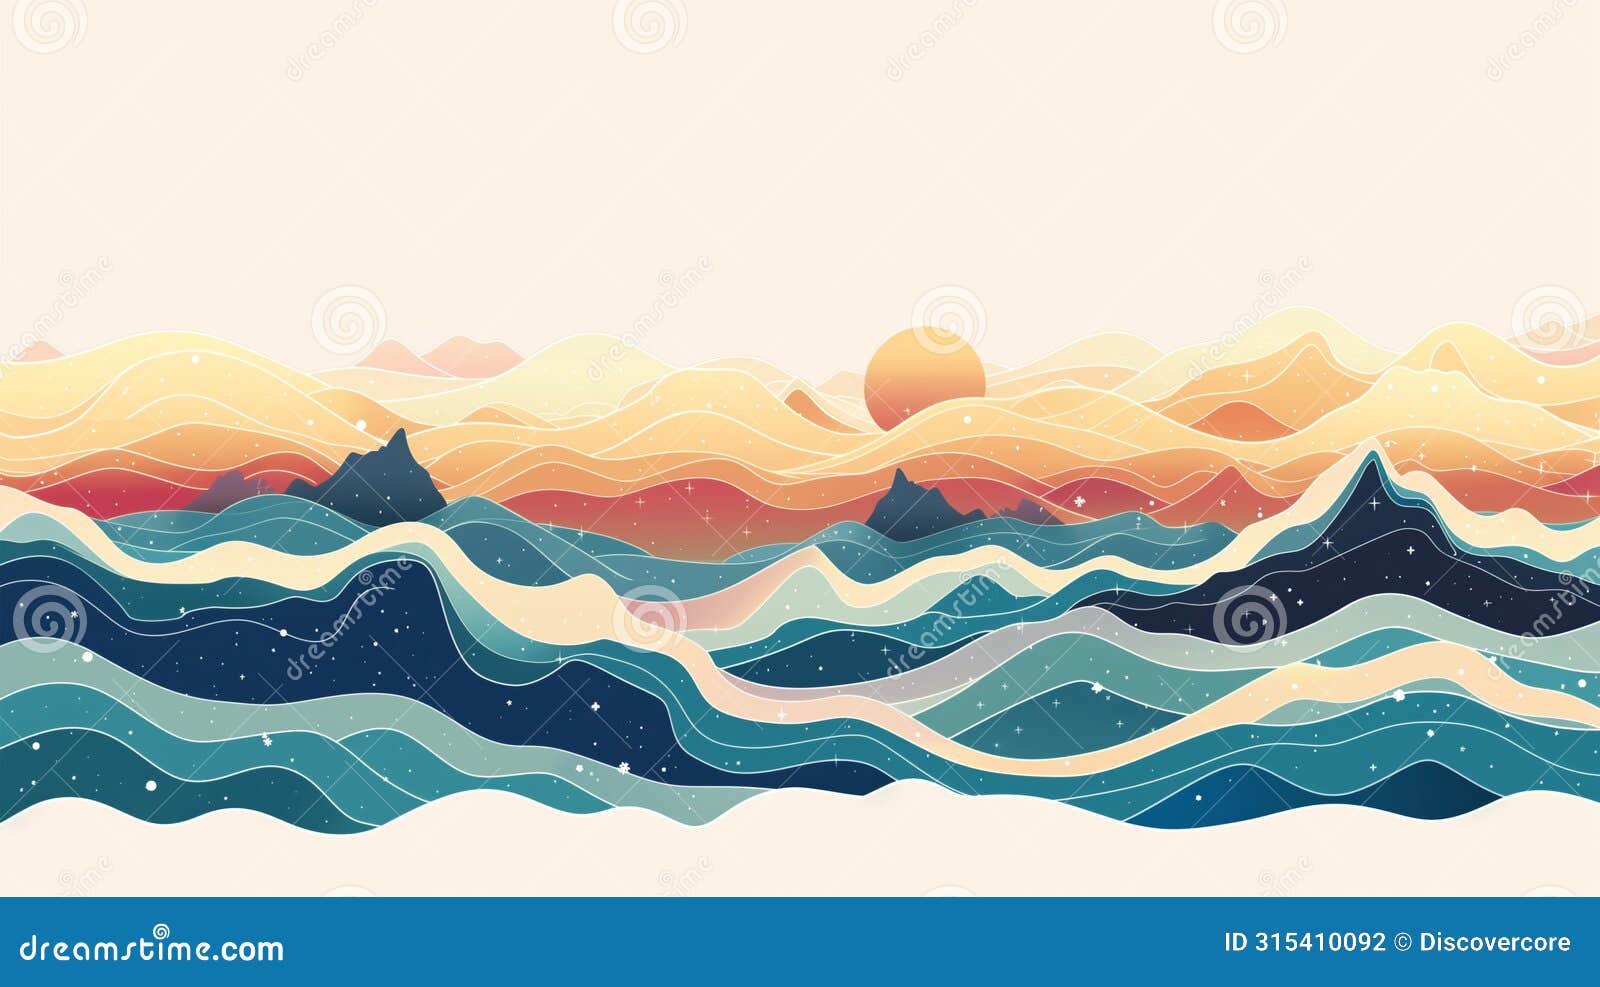 abstract sunrise over colorful waves: modern artistic interpretation of ocean and sun